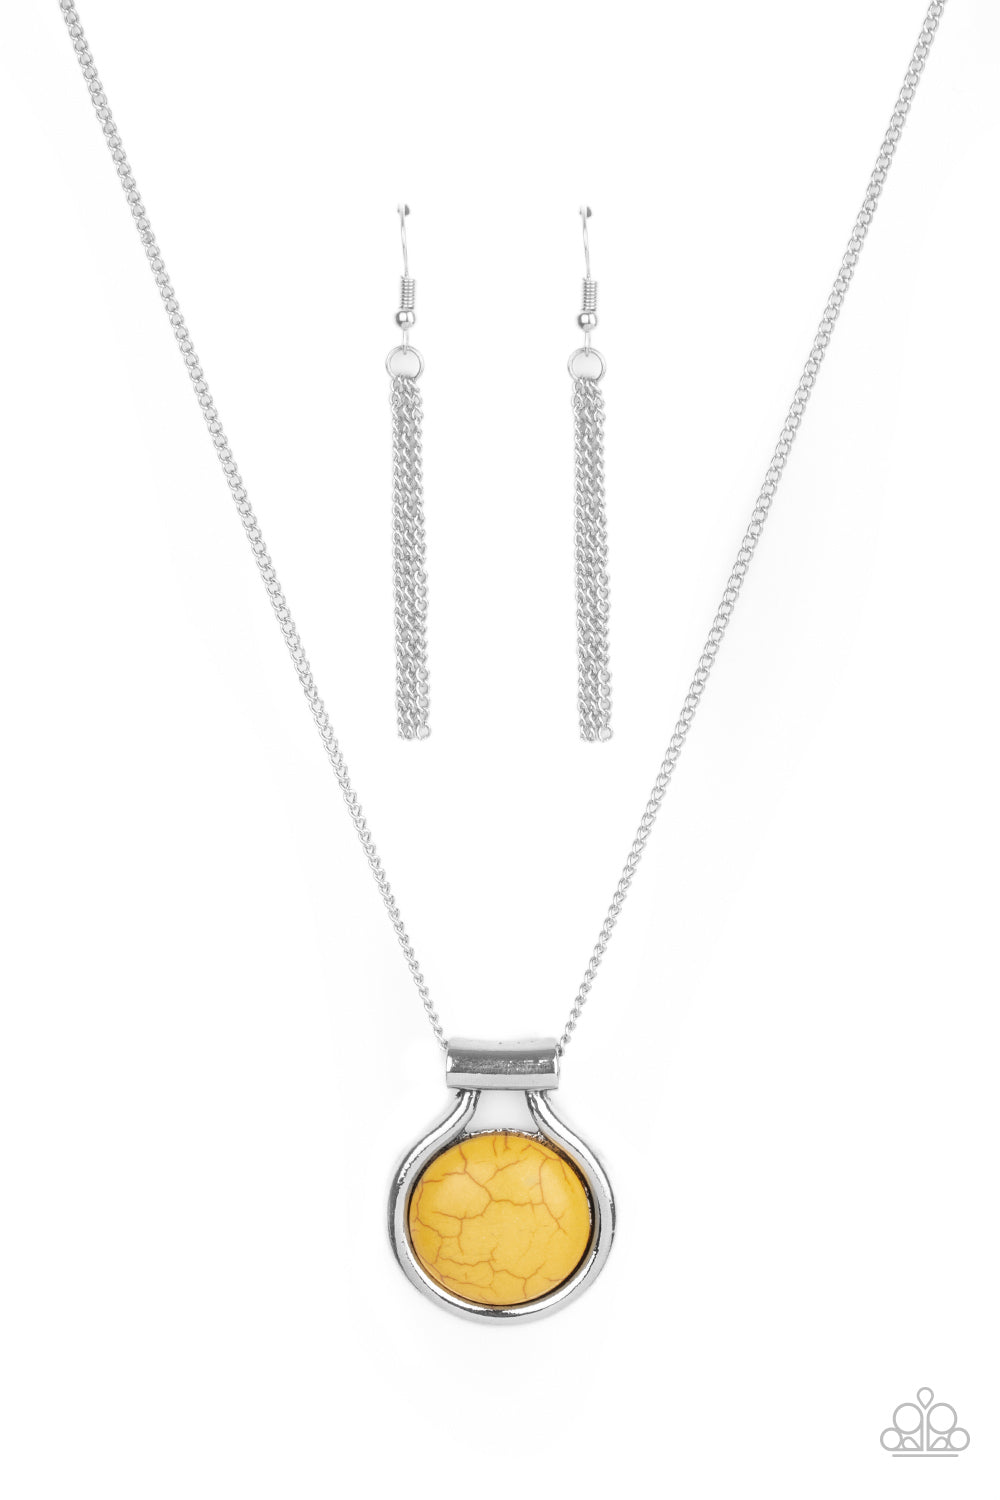 Patagonian Paradise - Yellow Necklace - Paparazzi Accessories